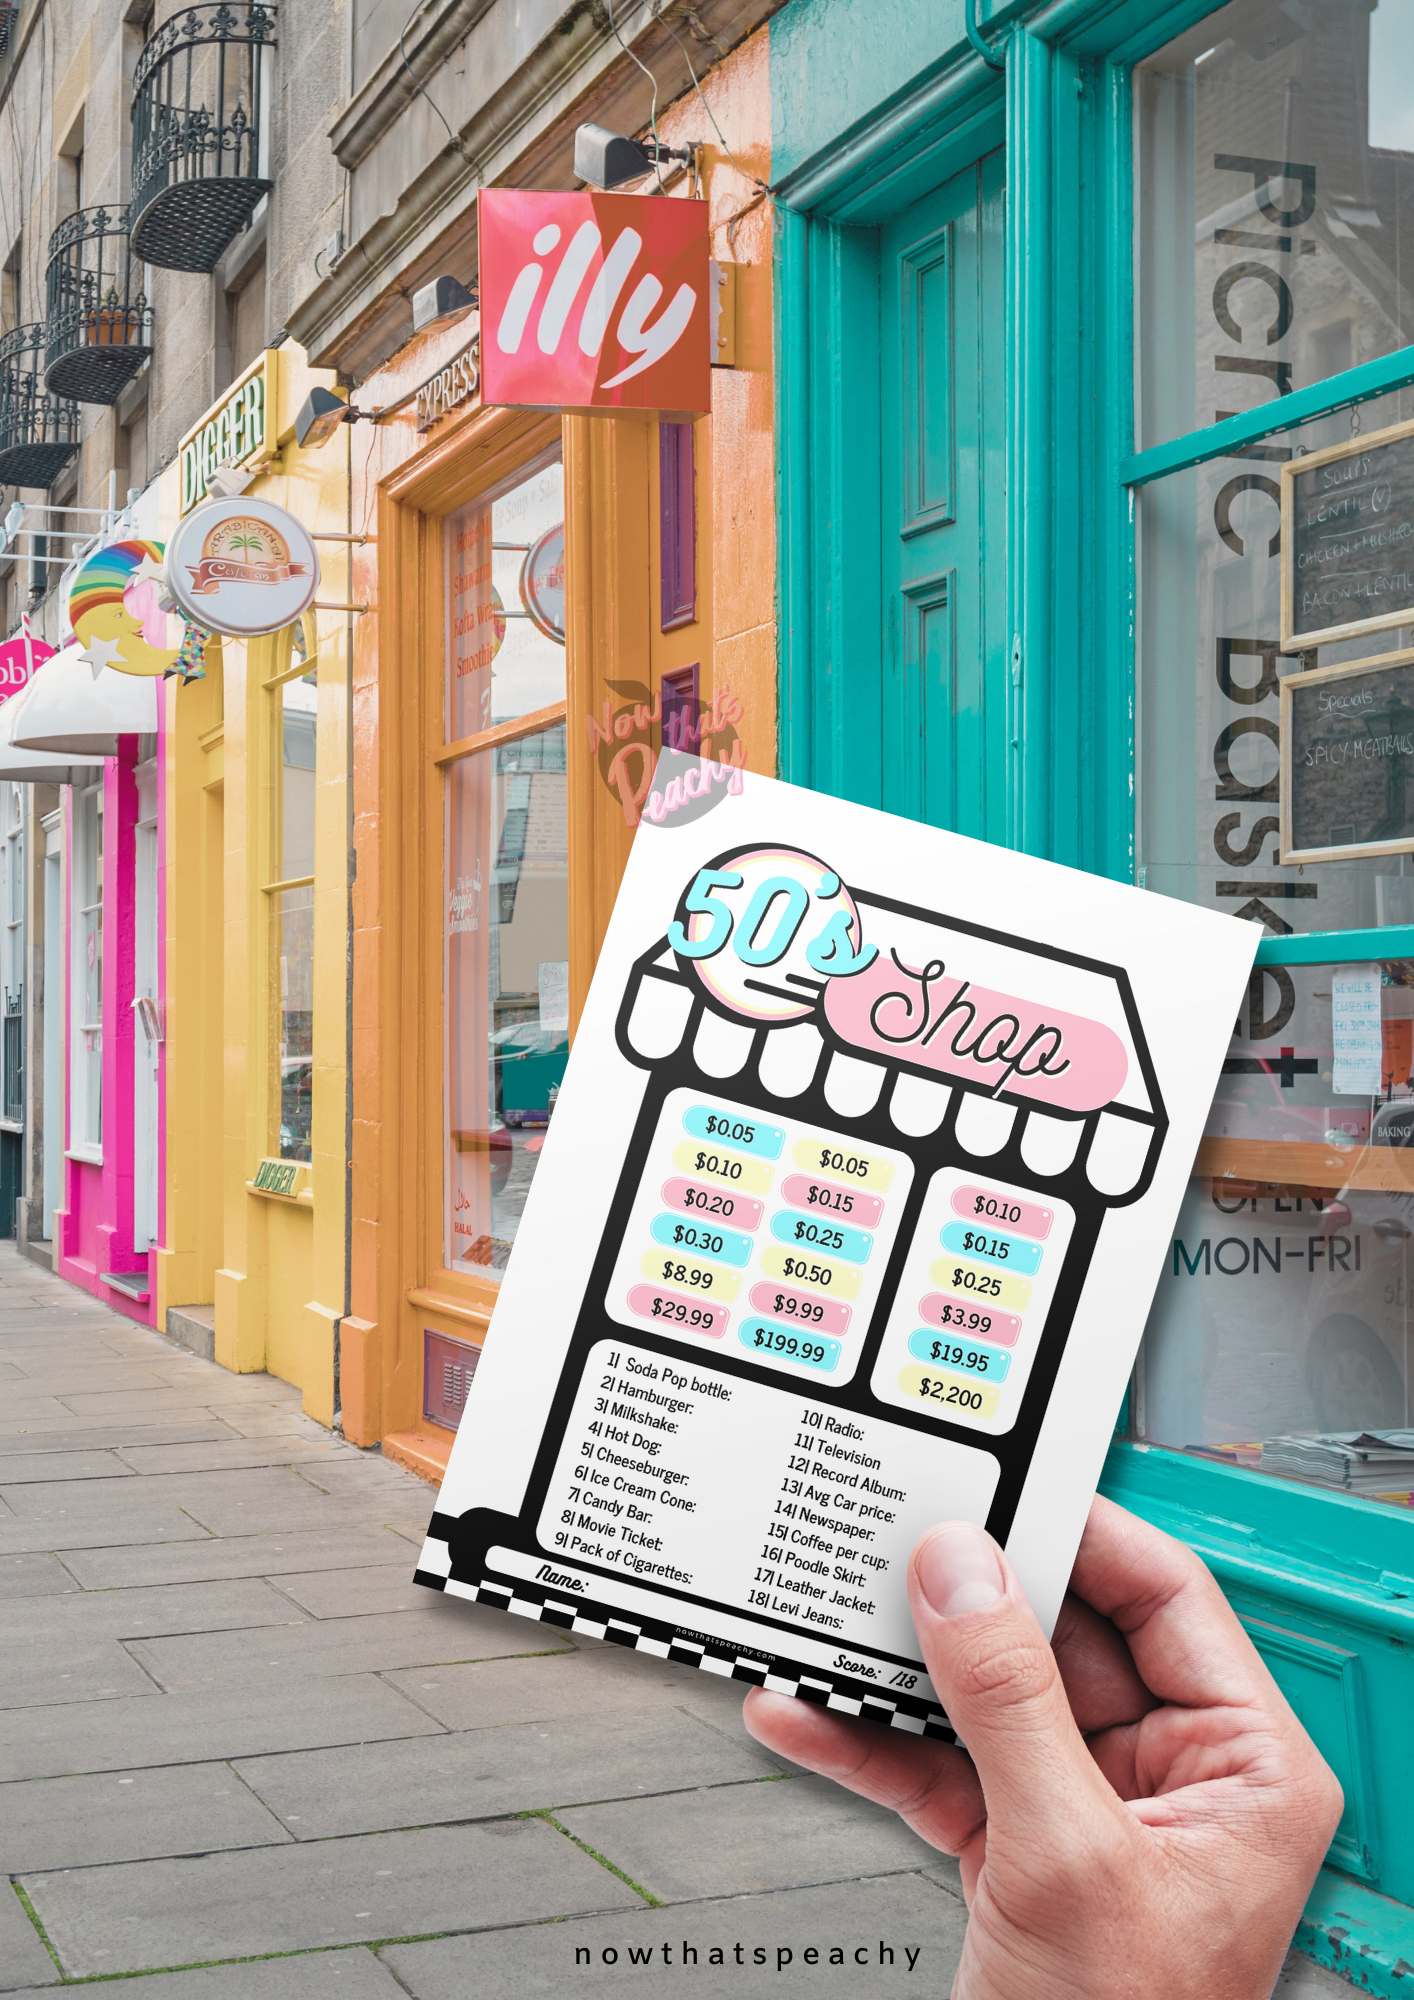 DINER 1950's Shop Price Guessing Game Party PRINTABLE, Rock'n'roll Sock Hop Retro 50s Birthday fifties Soda hop shoppe instant digital download price is right birthday kids teen adult all ages print off at home fun easy cheap games cute storefront kawaii